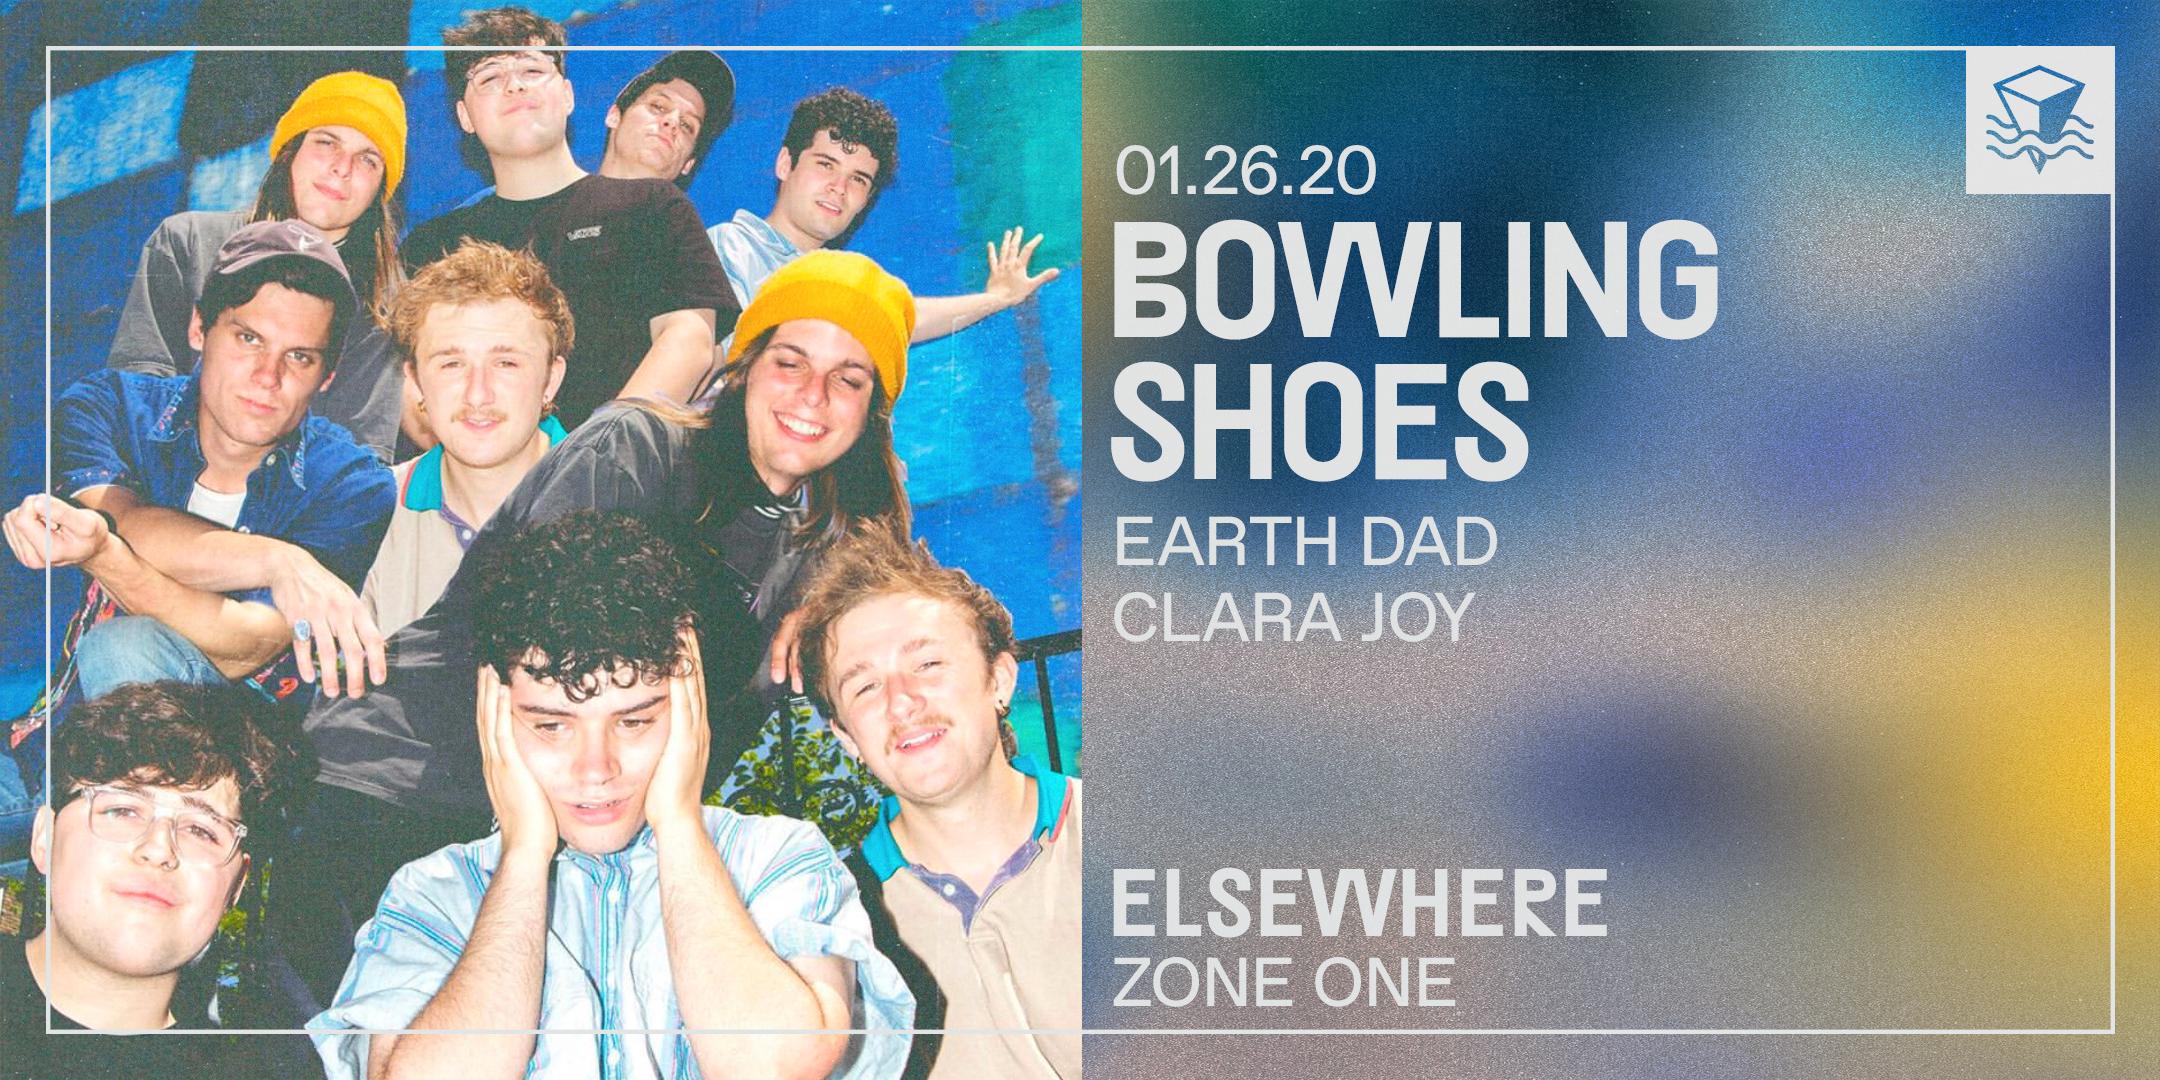 Bowling Shoes @ Elsewhere (Zone One)